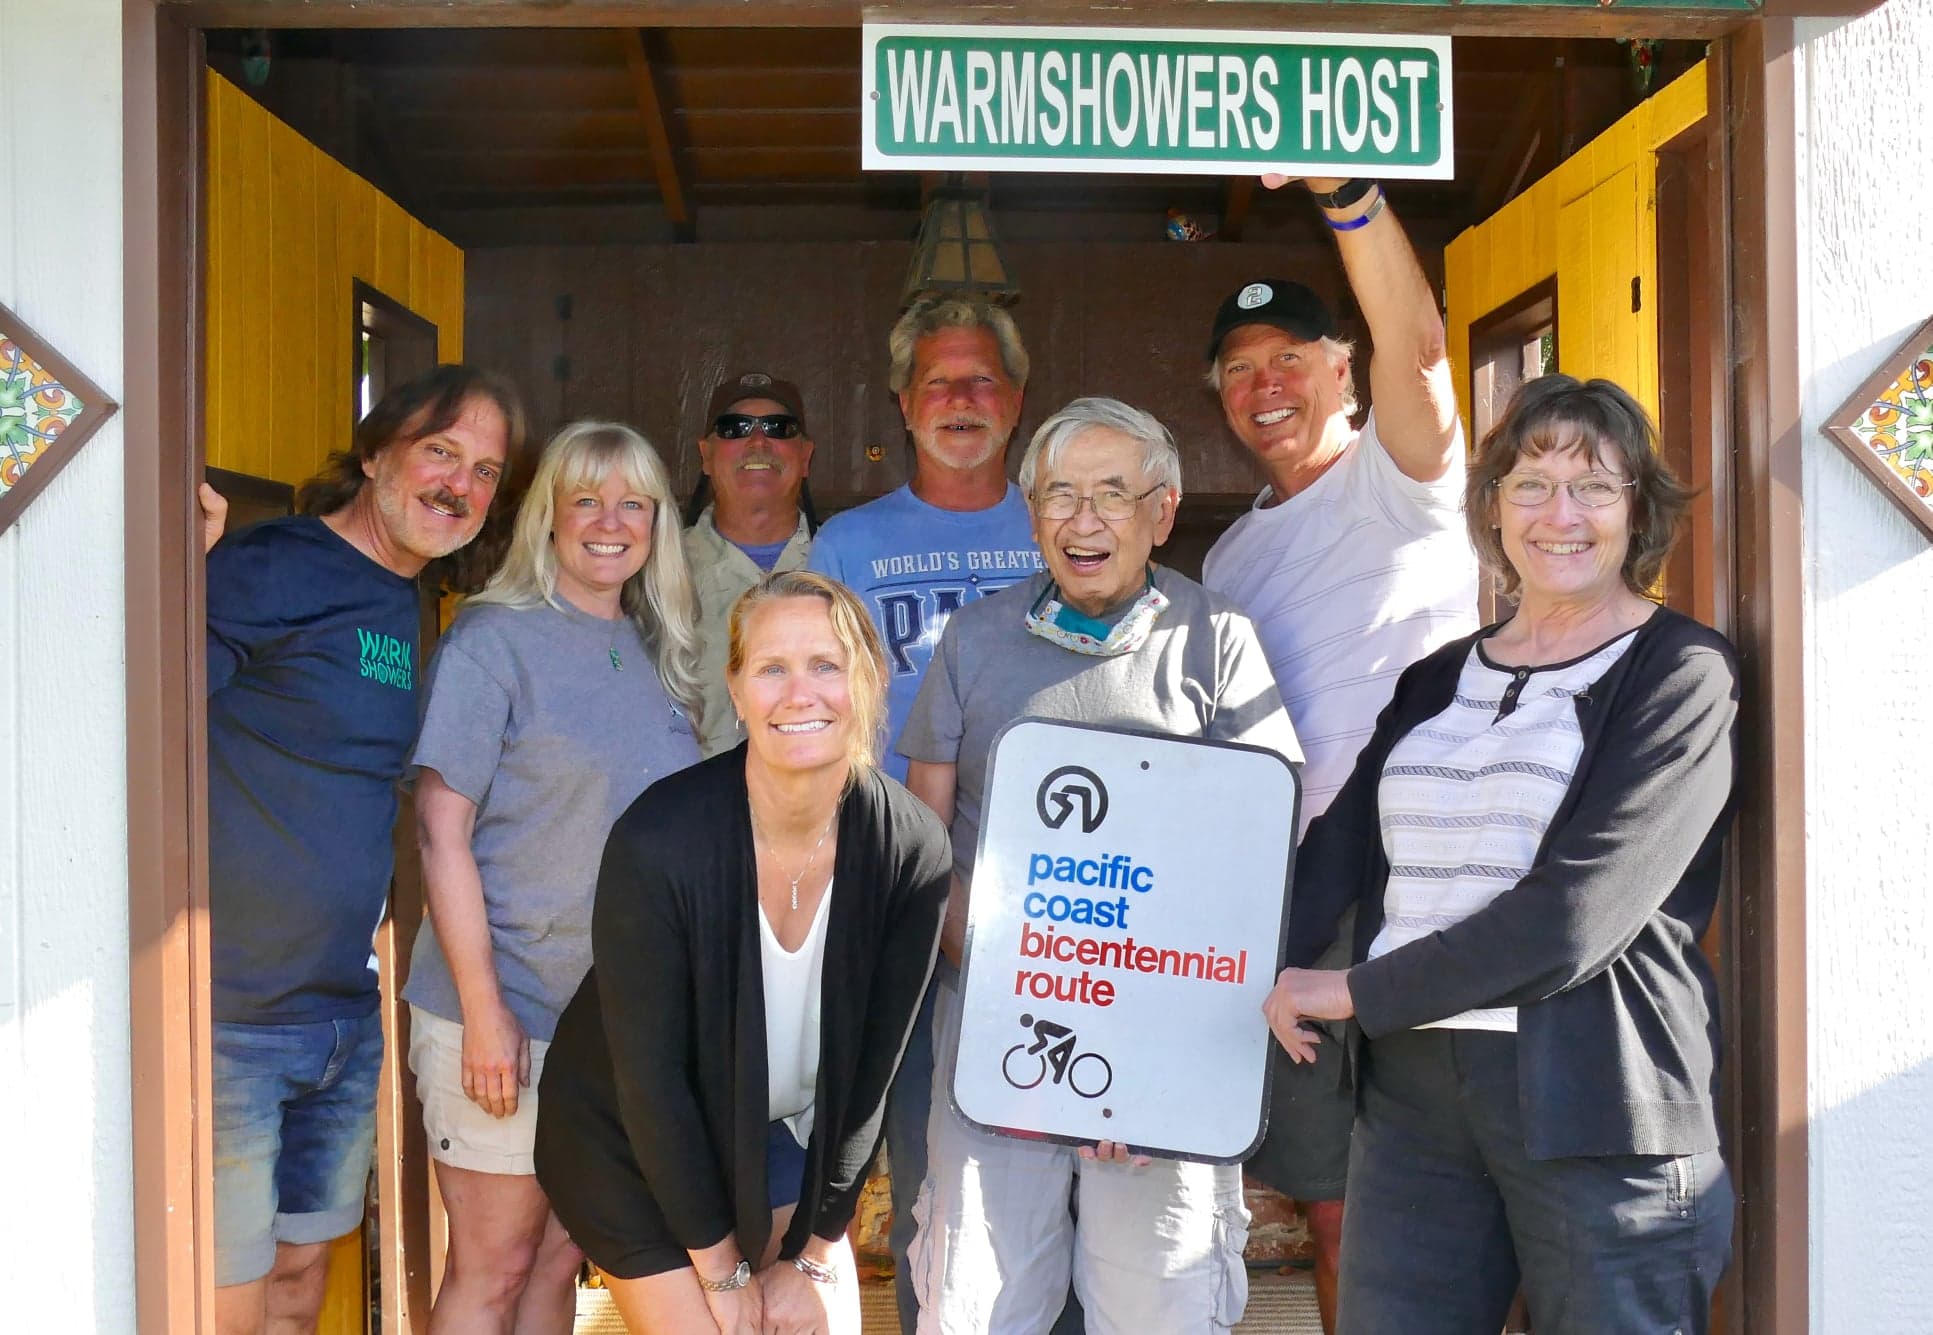 Warmshowers host and guests